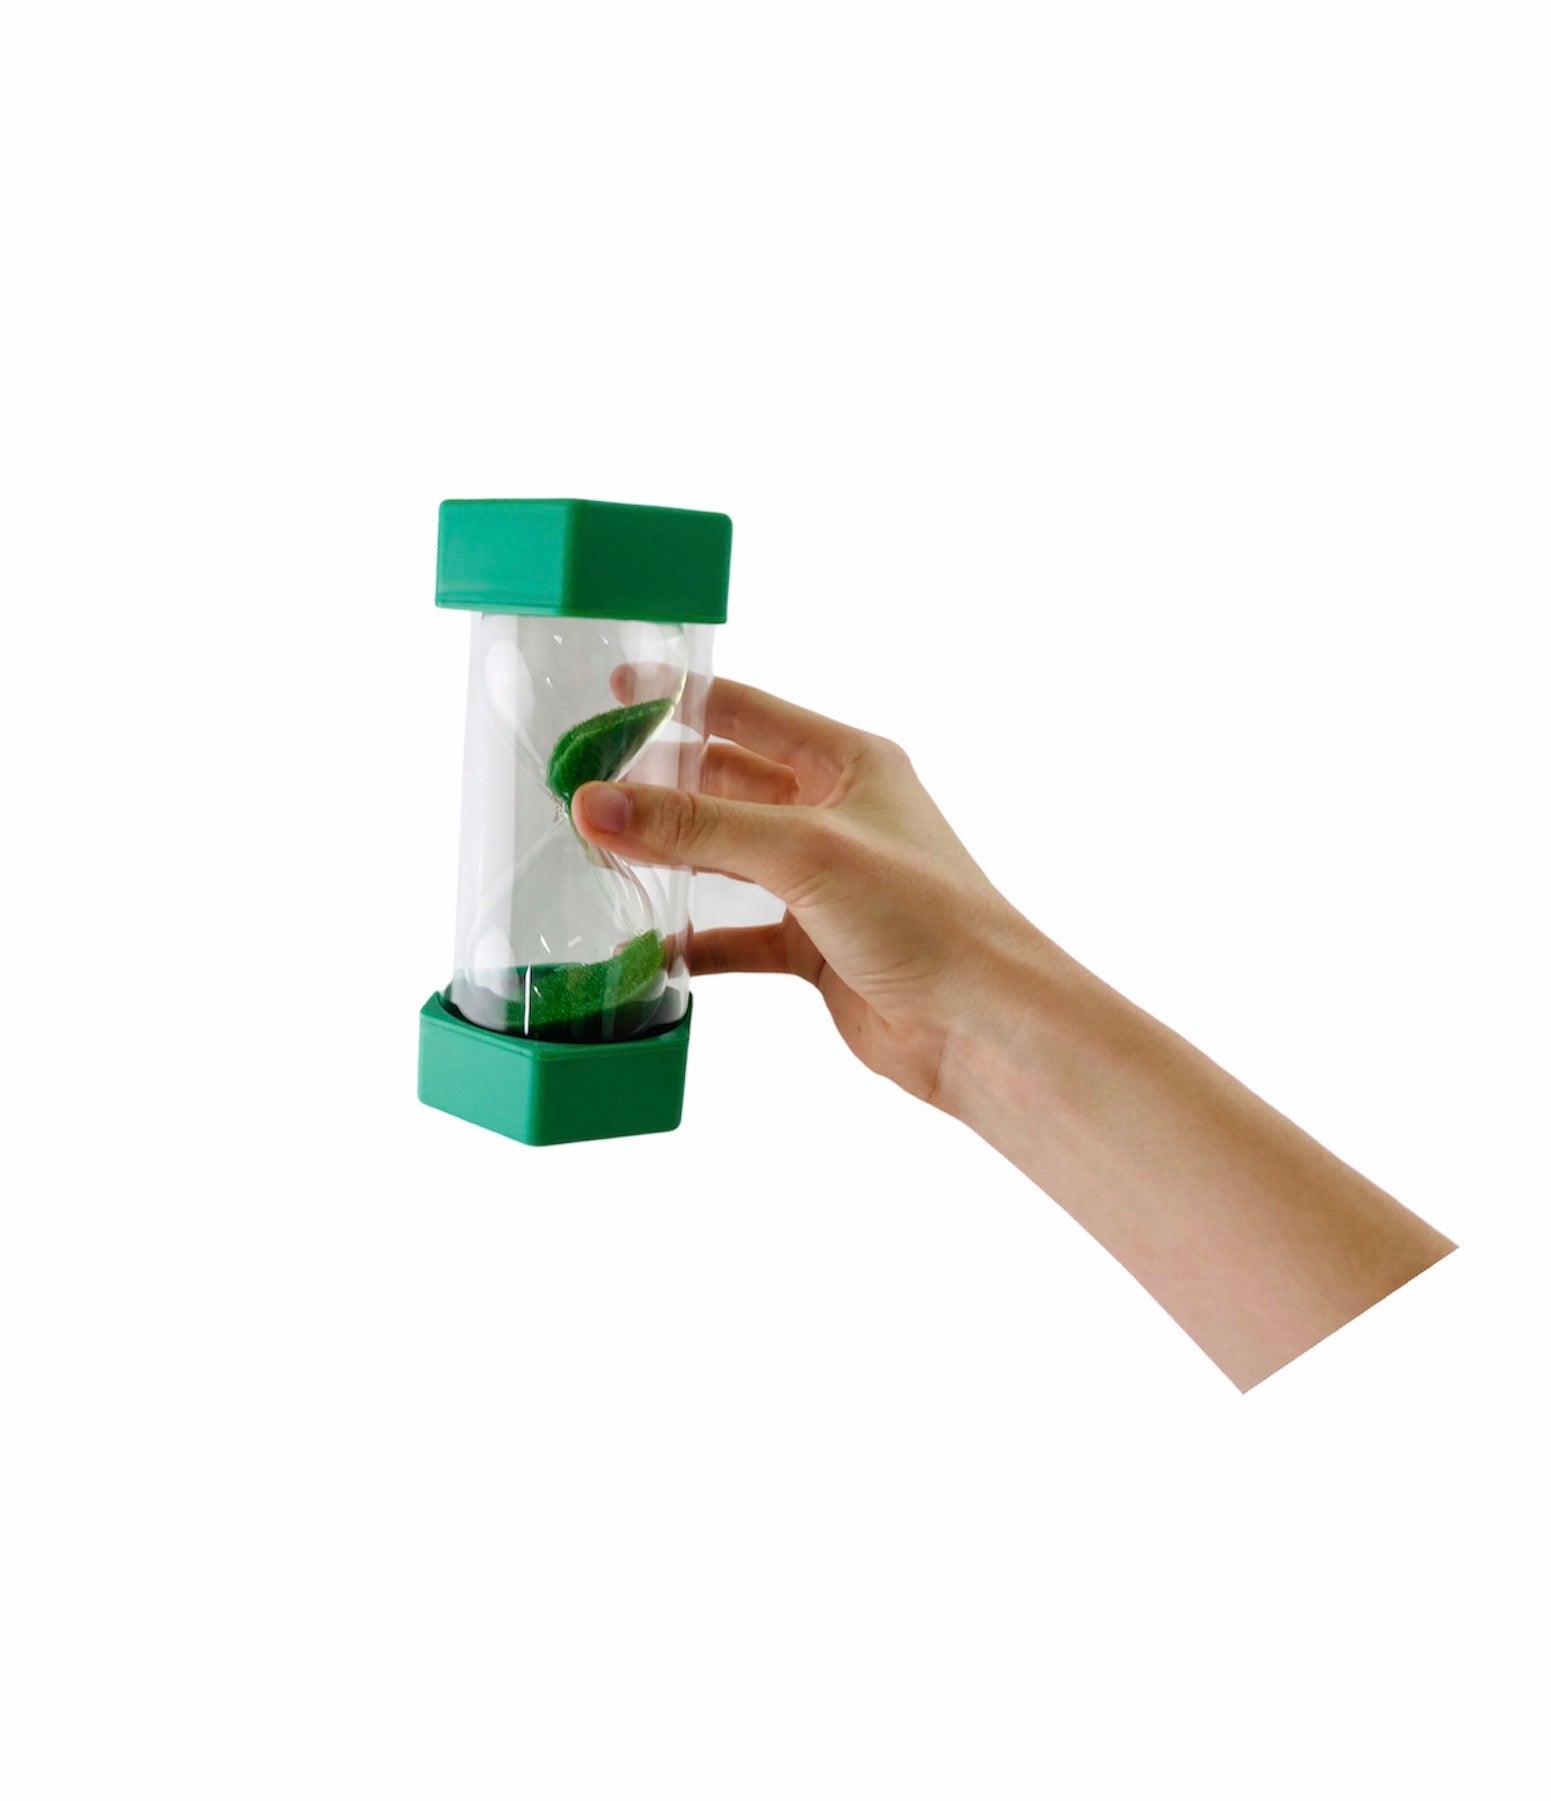 Hand Holding Giant Green 1 minute Sand Timer